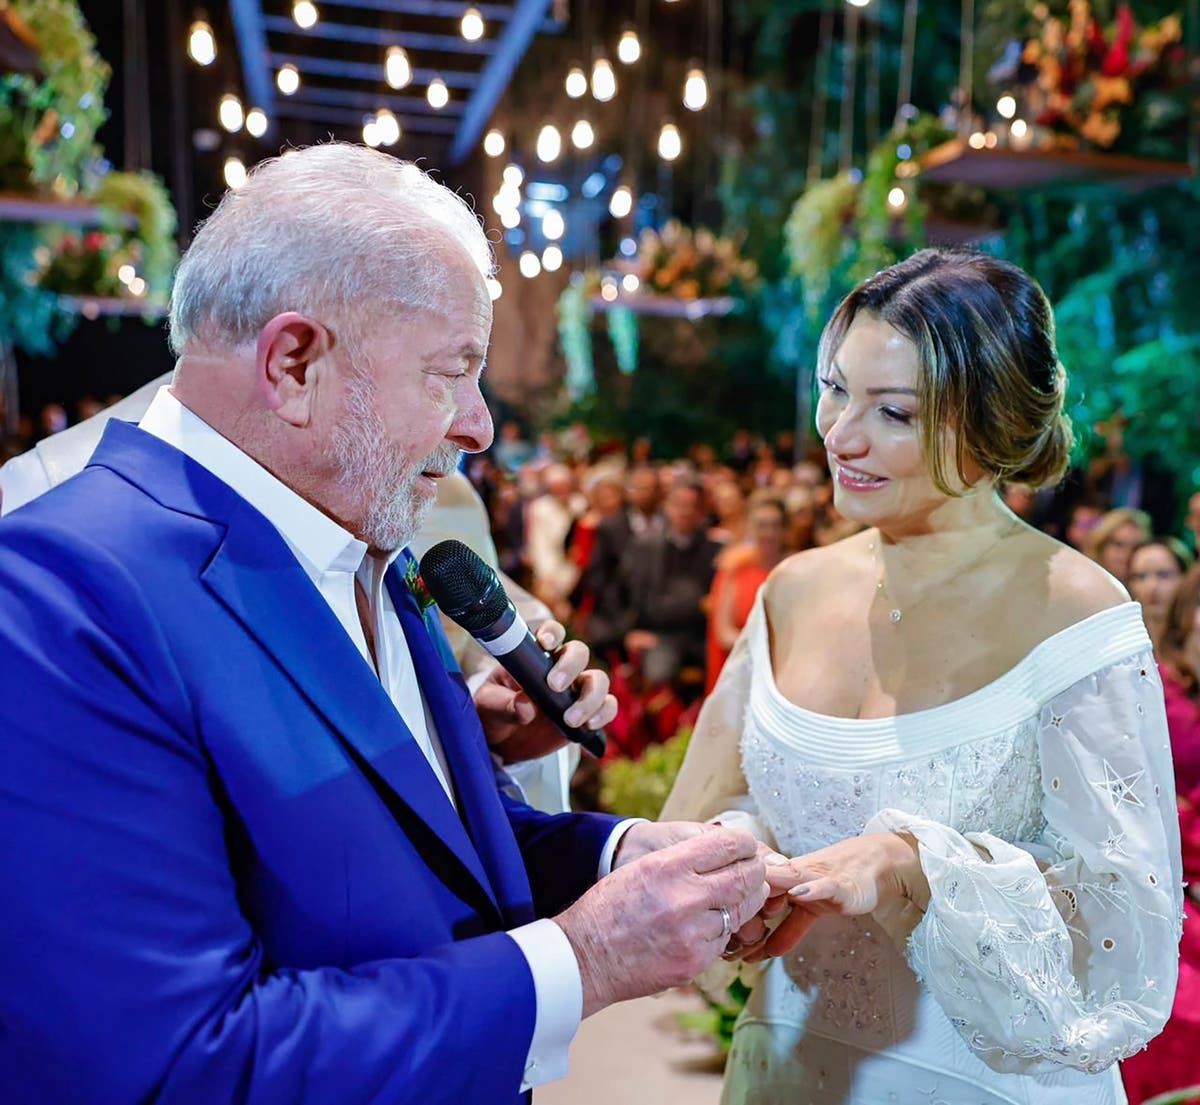 Brazil's Lula gets married at 76 with a political touch